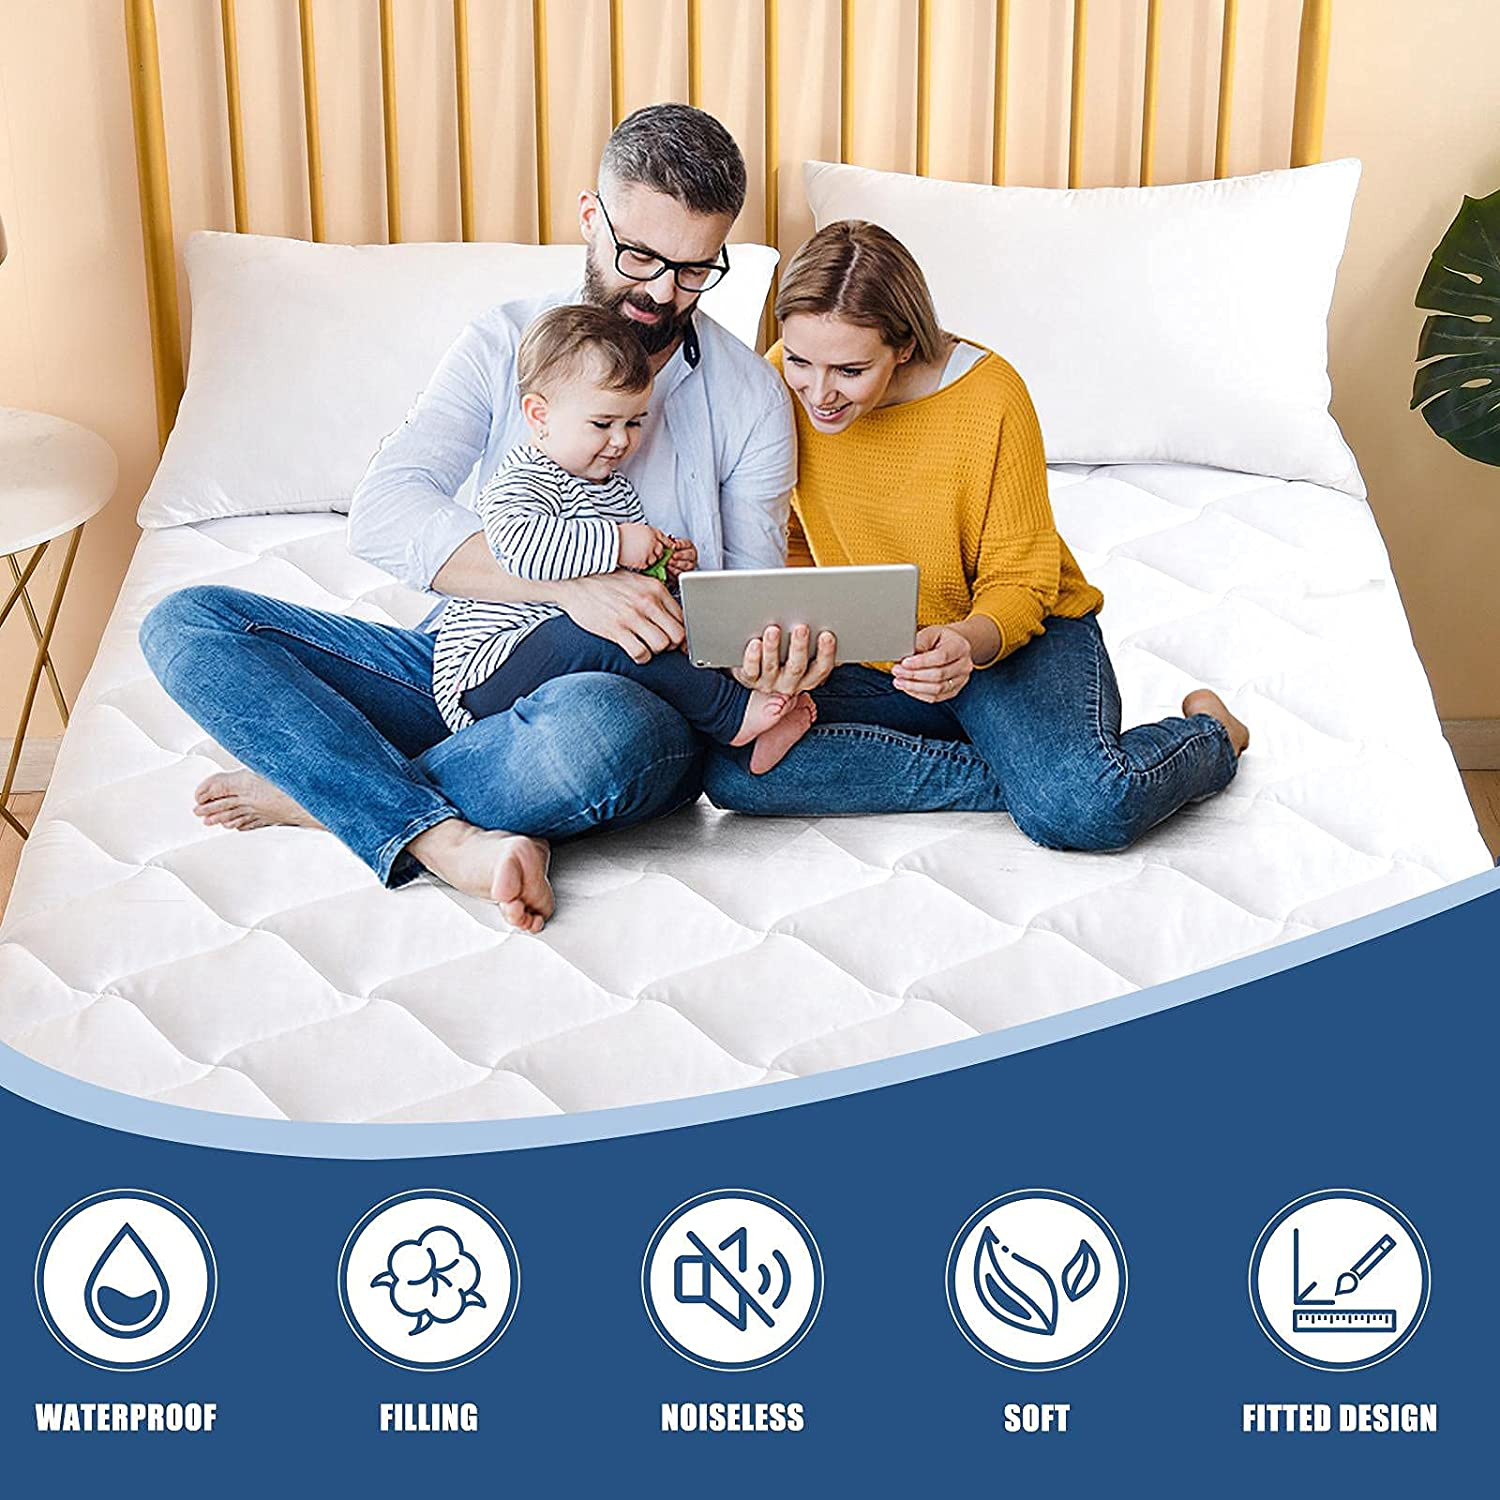 Queen Size Quilted Fitted Mattress Pad, Waterproof Breathable Cooling Mattress pad, Stretches up to 21 Inches Deep Pocket Hollow Alternative Filling Noiseless Mattress Cover